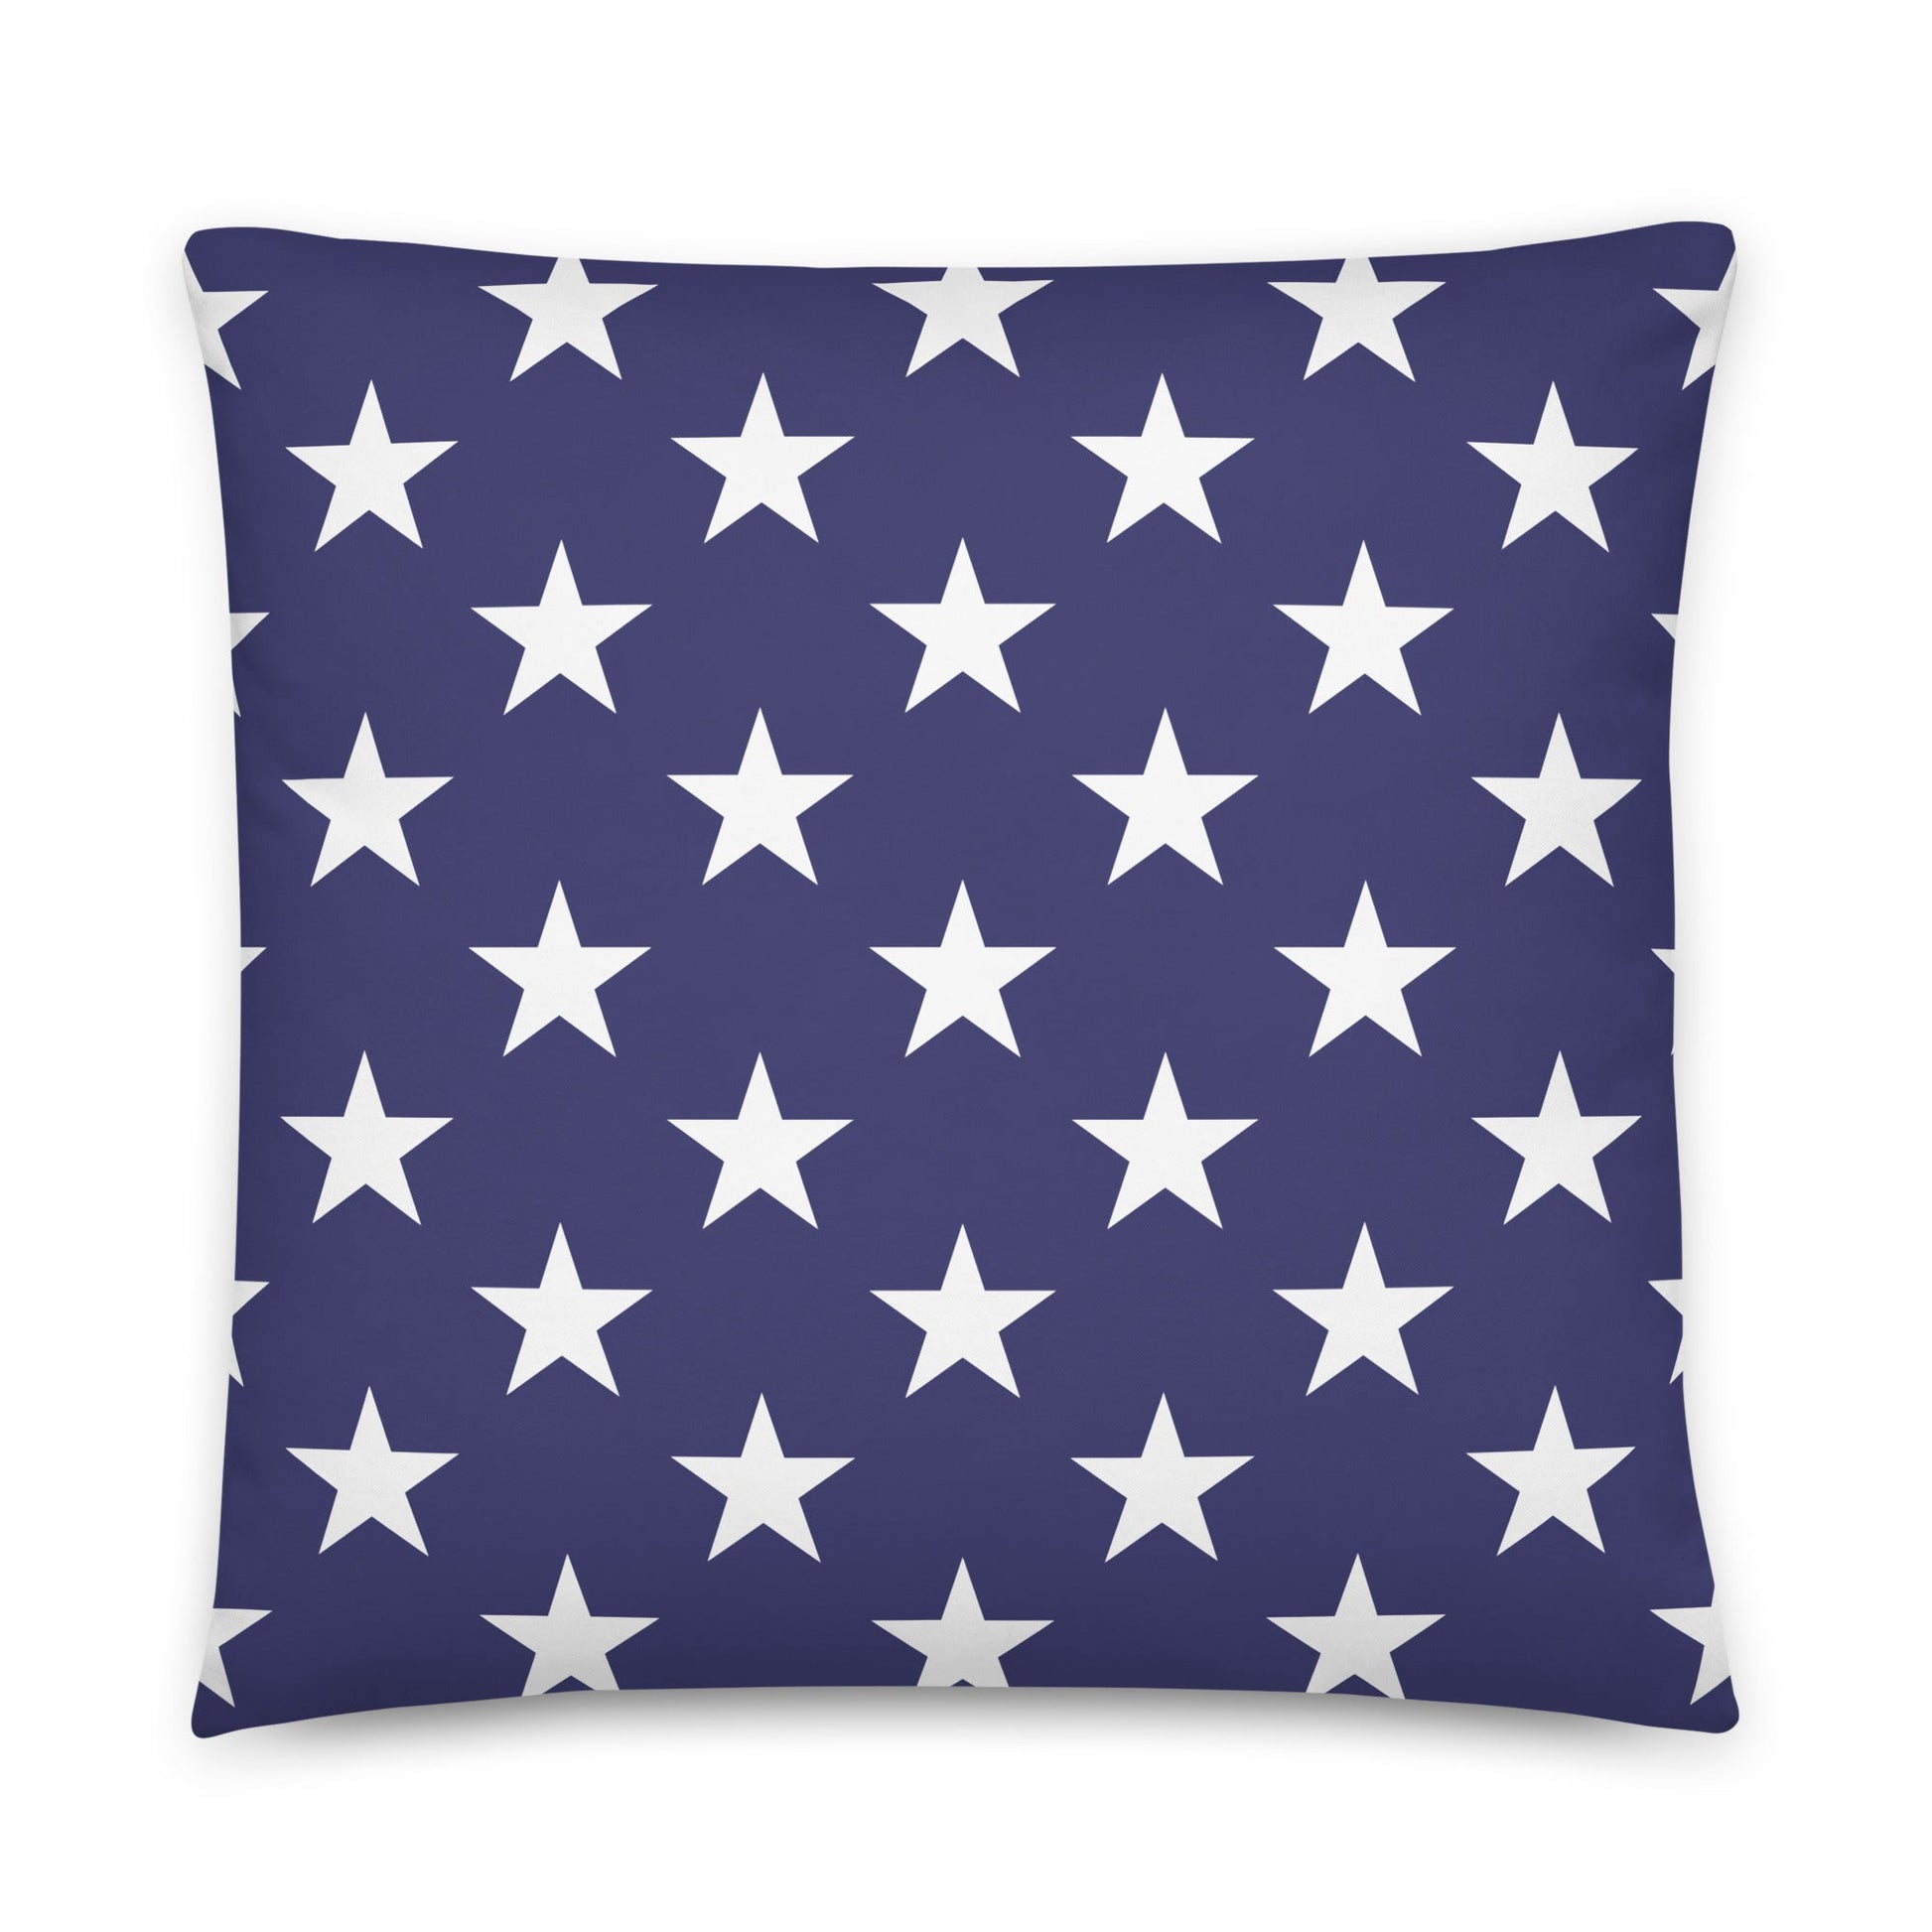 Kennedy Classic Pillows - TEAM KENNEDY. All rights reserved